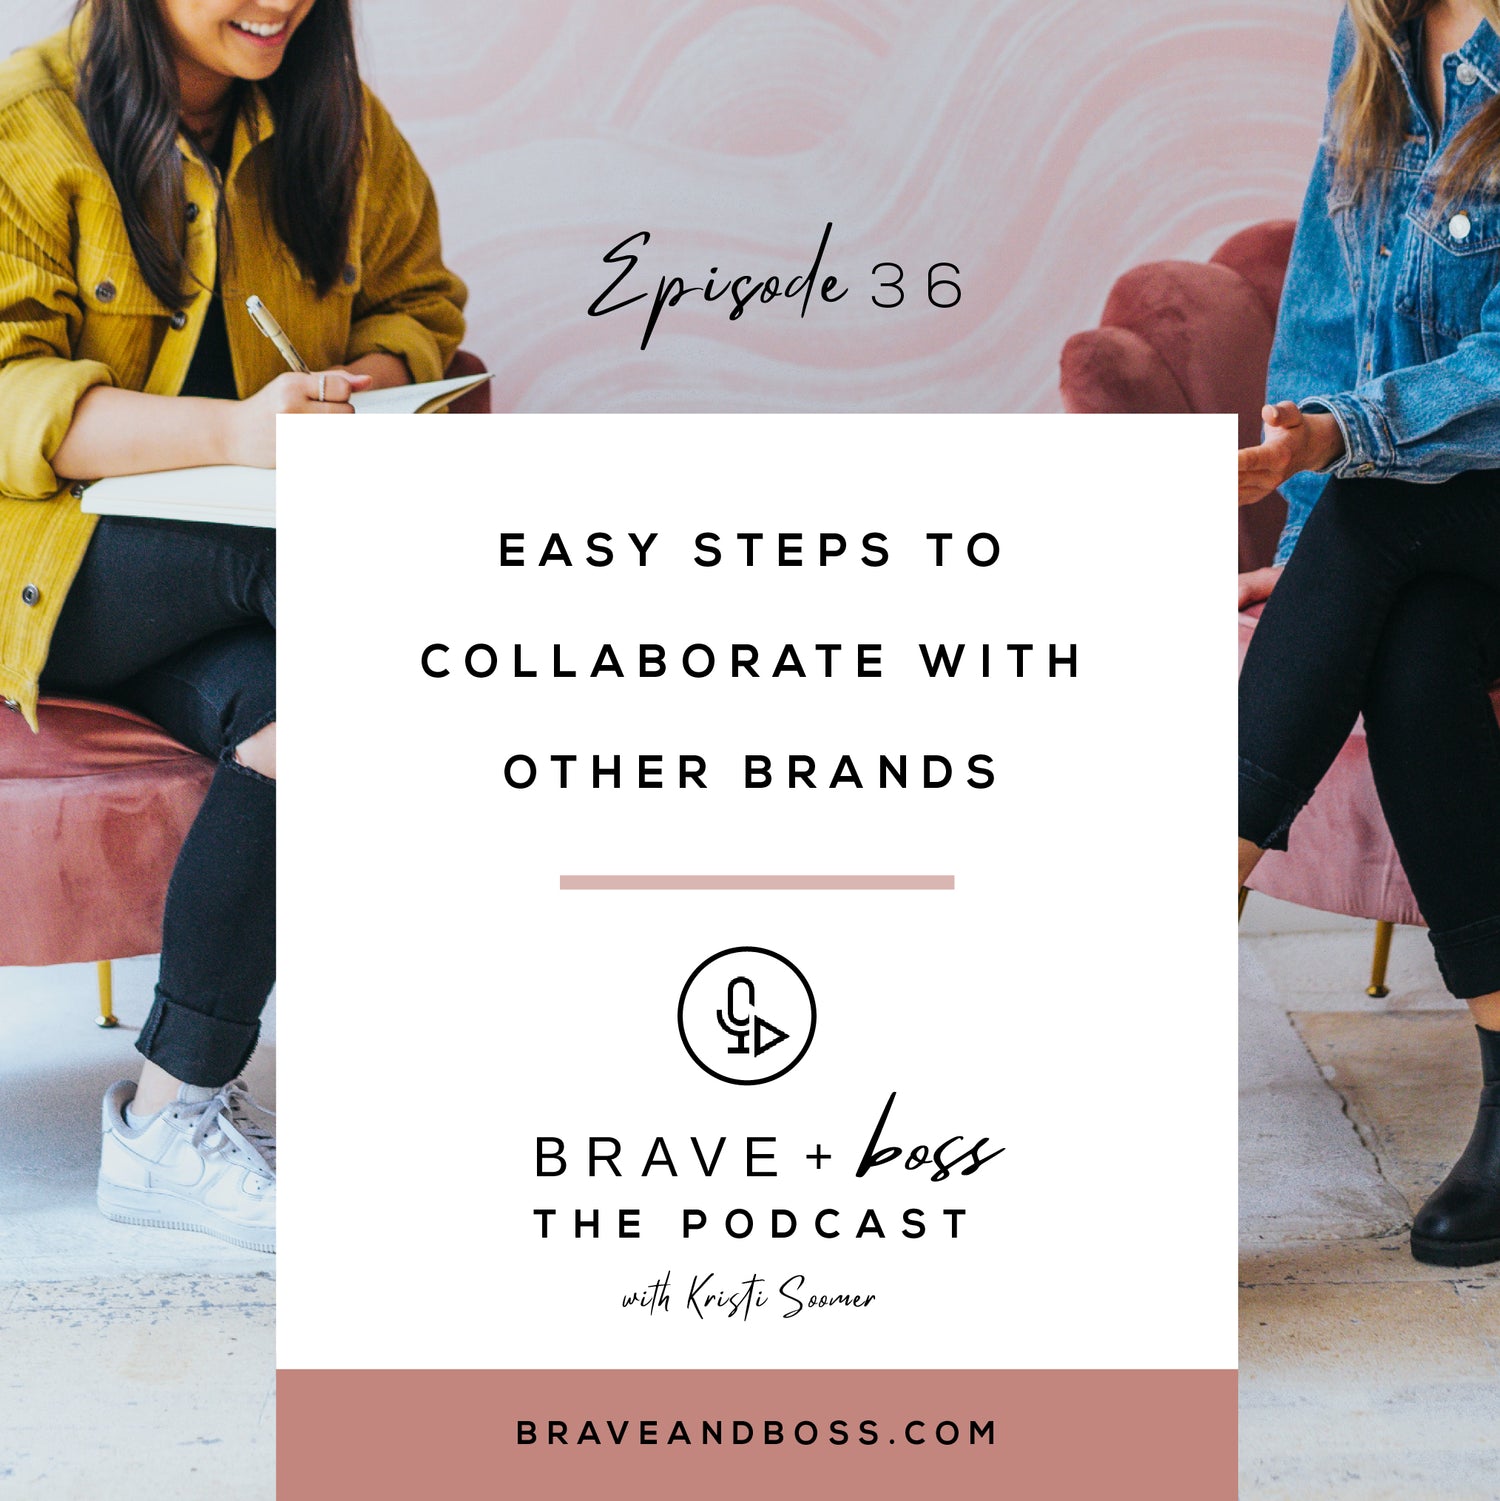 Easy Steps to Collaborate with Other Brands